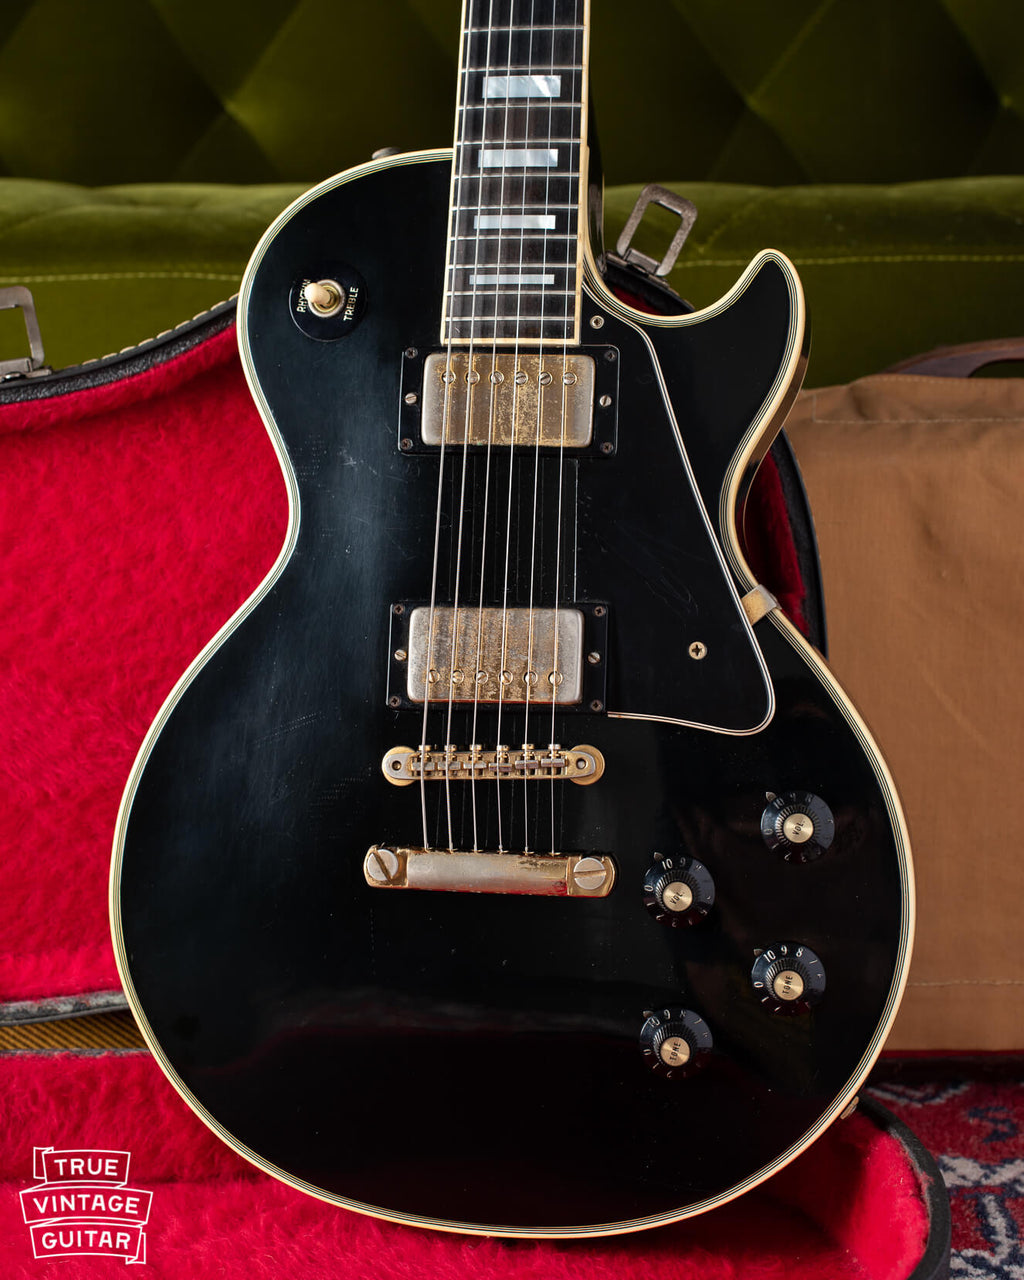 Gibson Les Paul Custom 1974 electric guitar with black finish and gold hardware